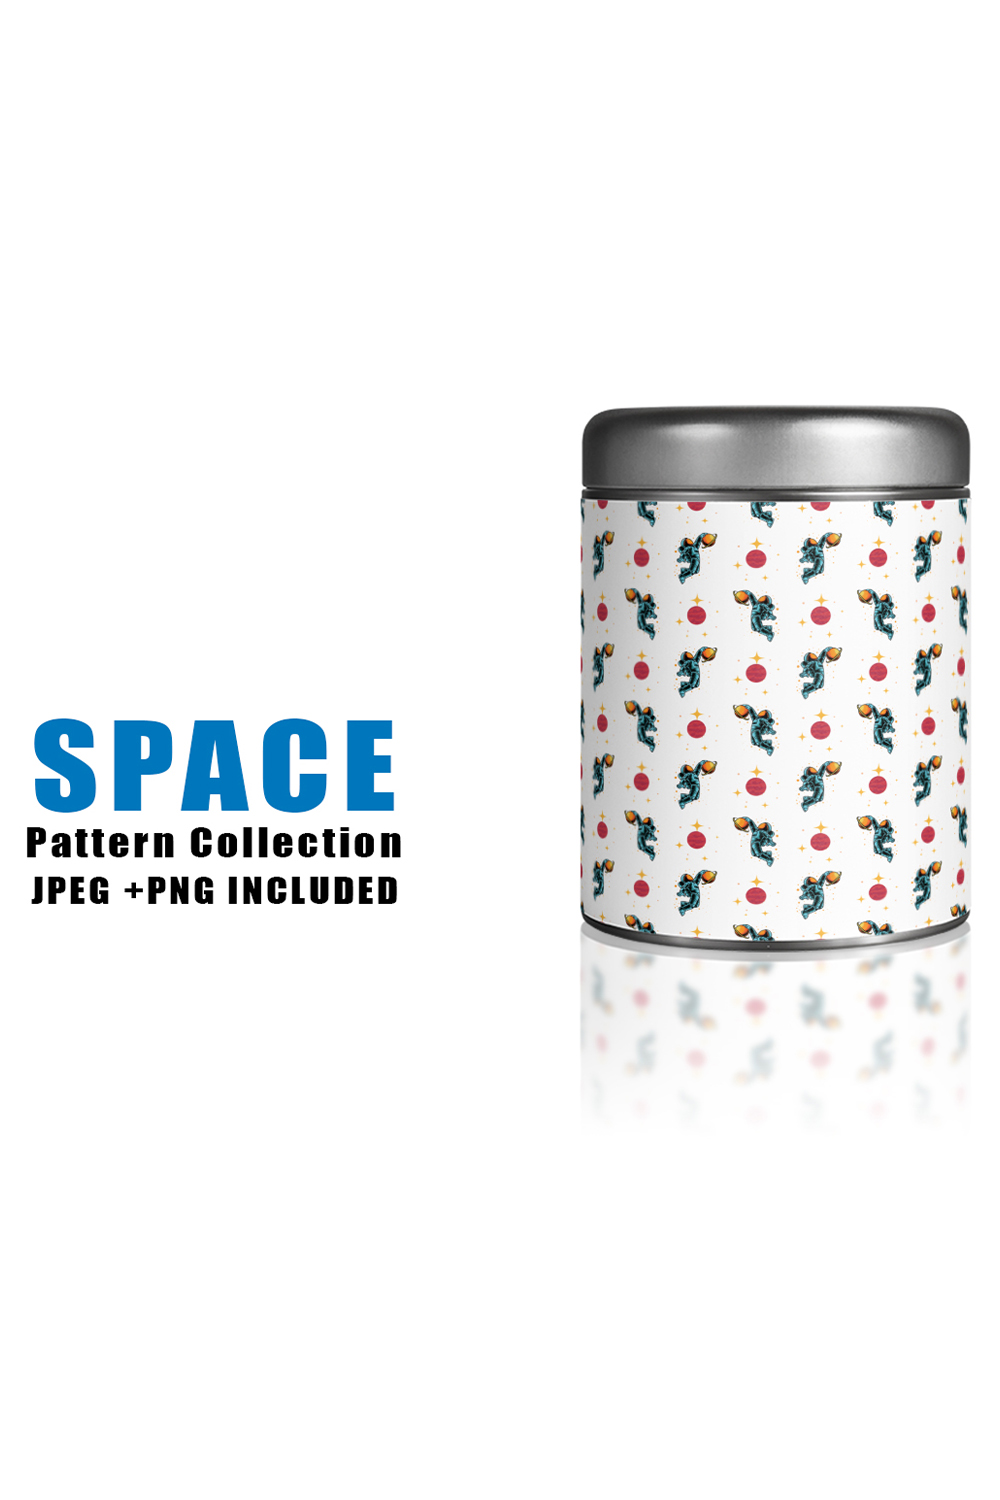 Image of a jar with wonderful patterns on the theme of space